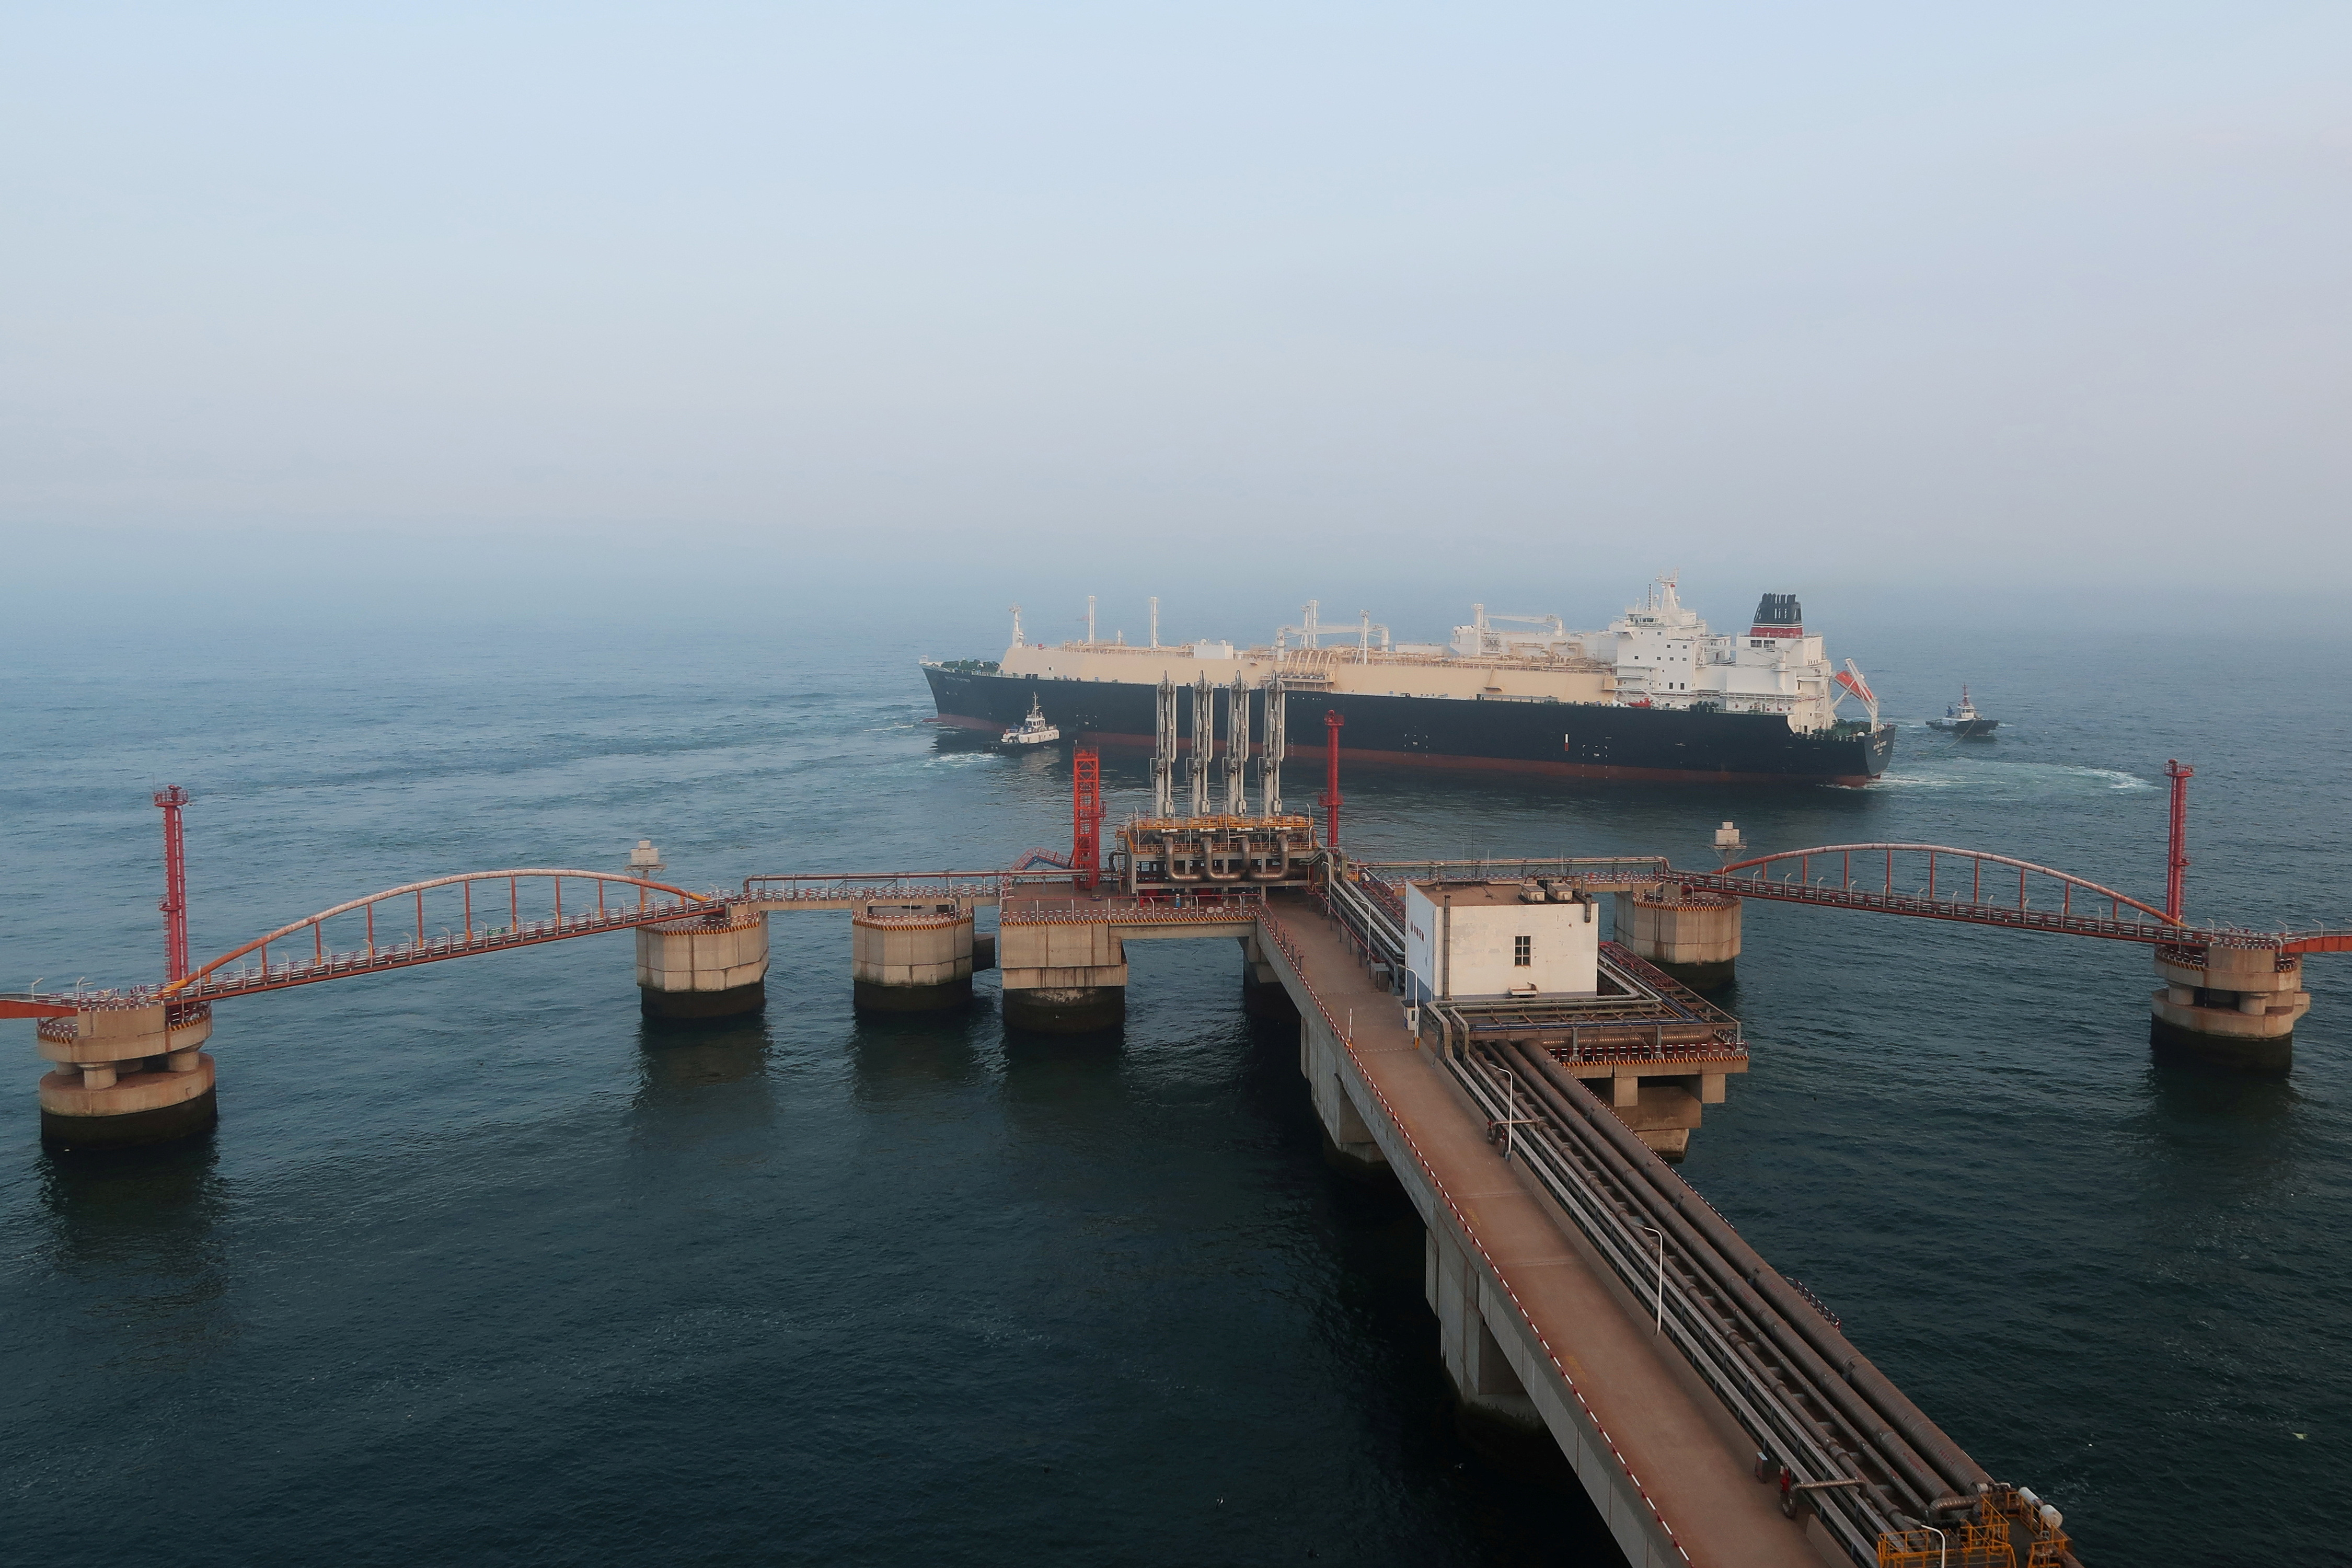 A liquified natural gas (LNG) tanker leaves the dock after discharge at PetroChina's receiving terminal in Dalian